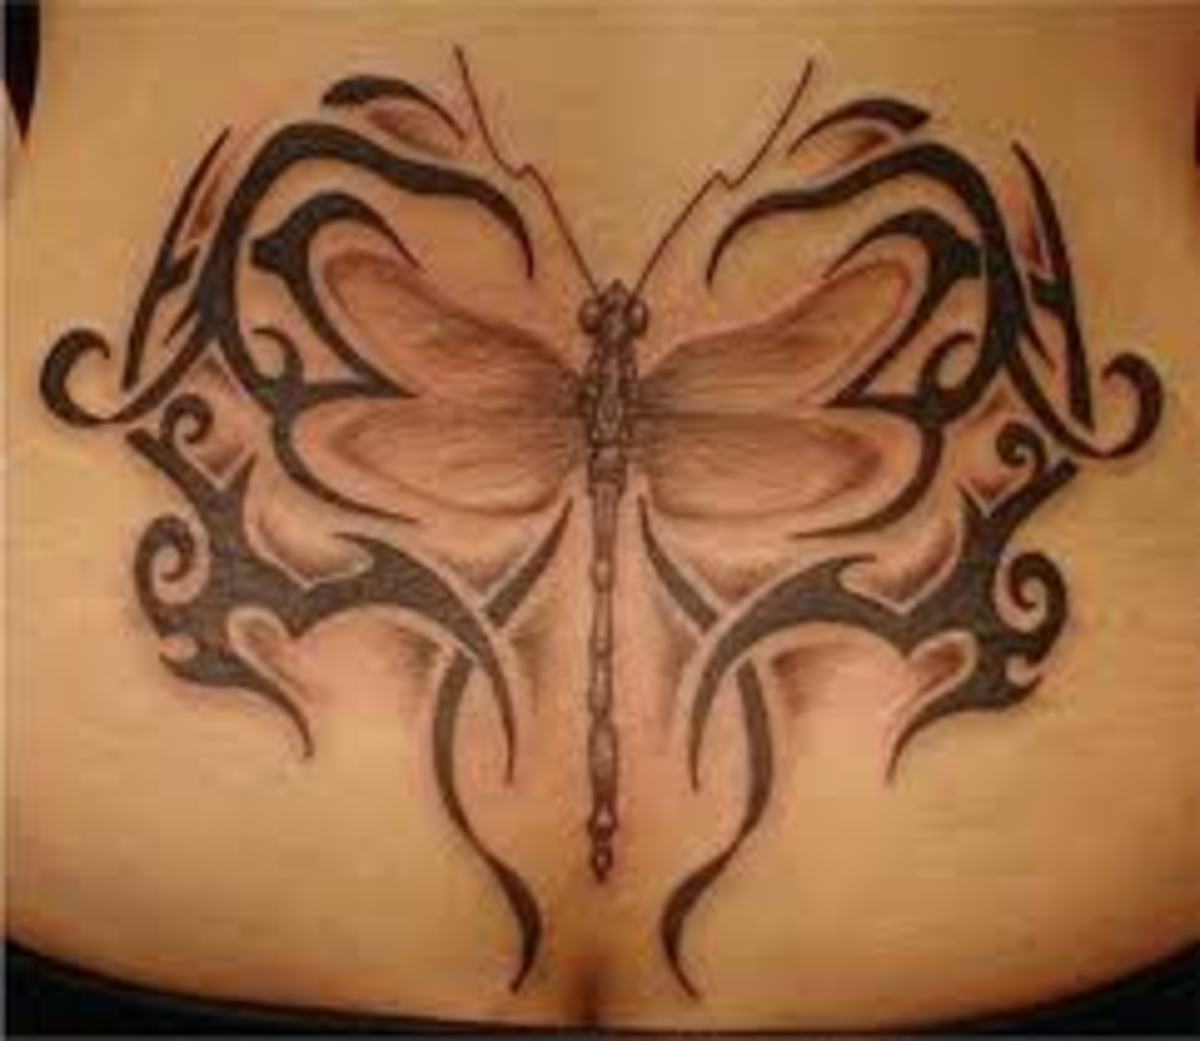 Tribal Tattoo Designs For Women-Tribal Tattoo Ideas And Meanings For